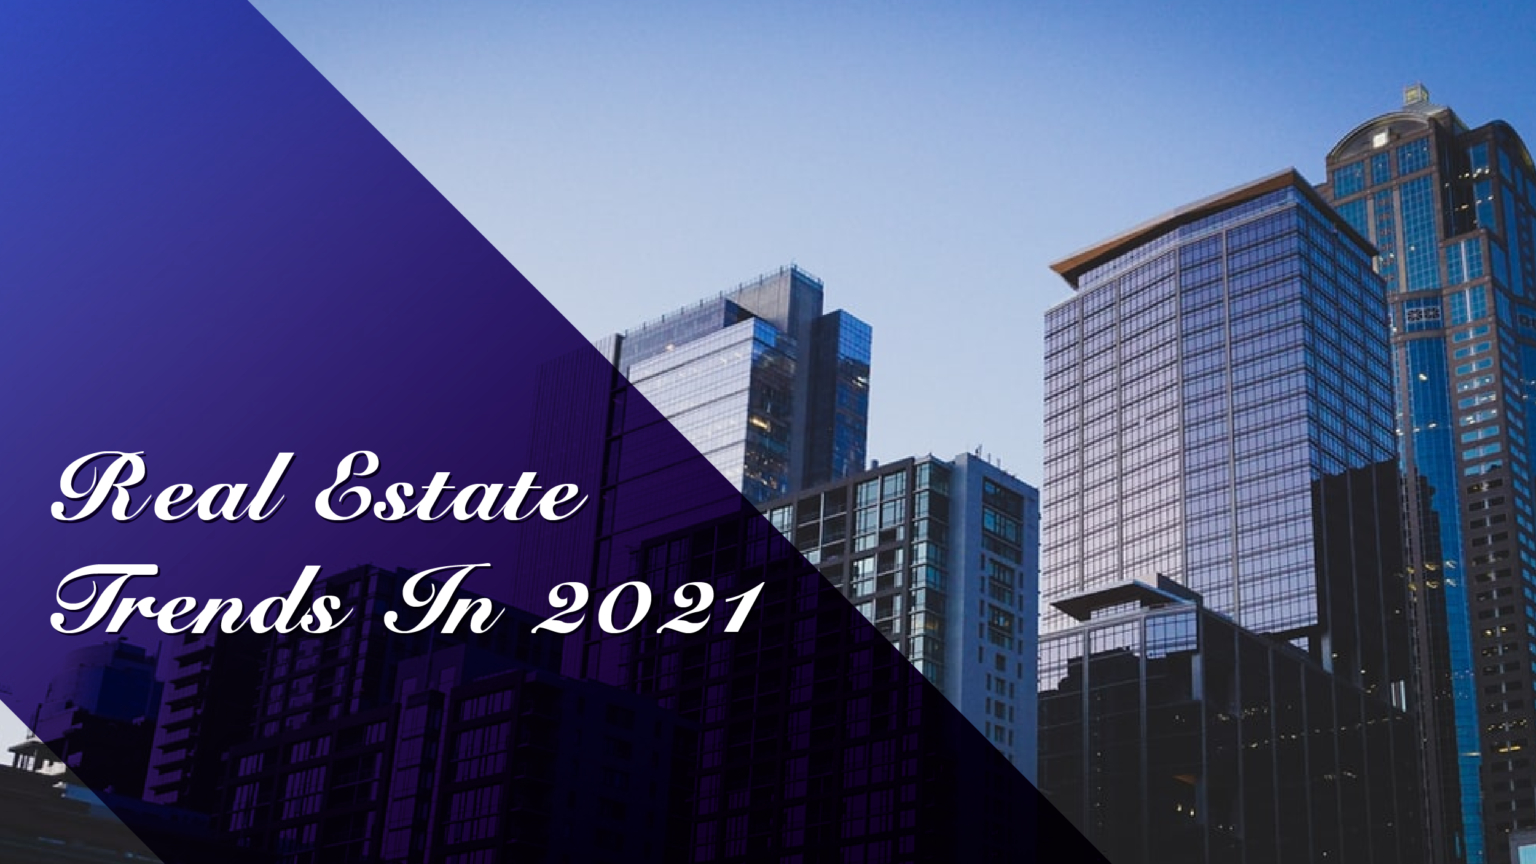 Real Estate Trends In 2021 Real Estate Marketing Trends 2021